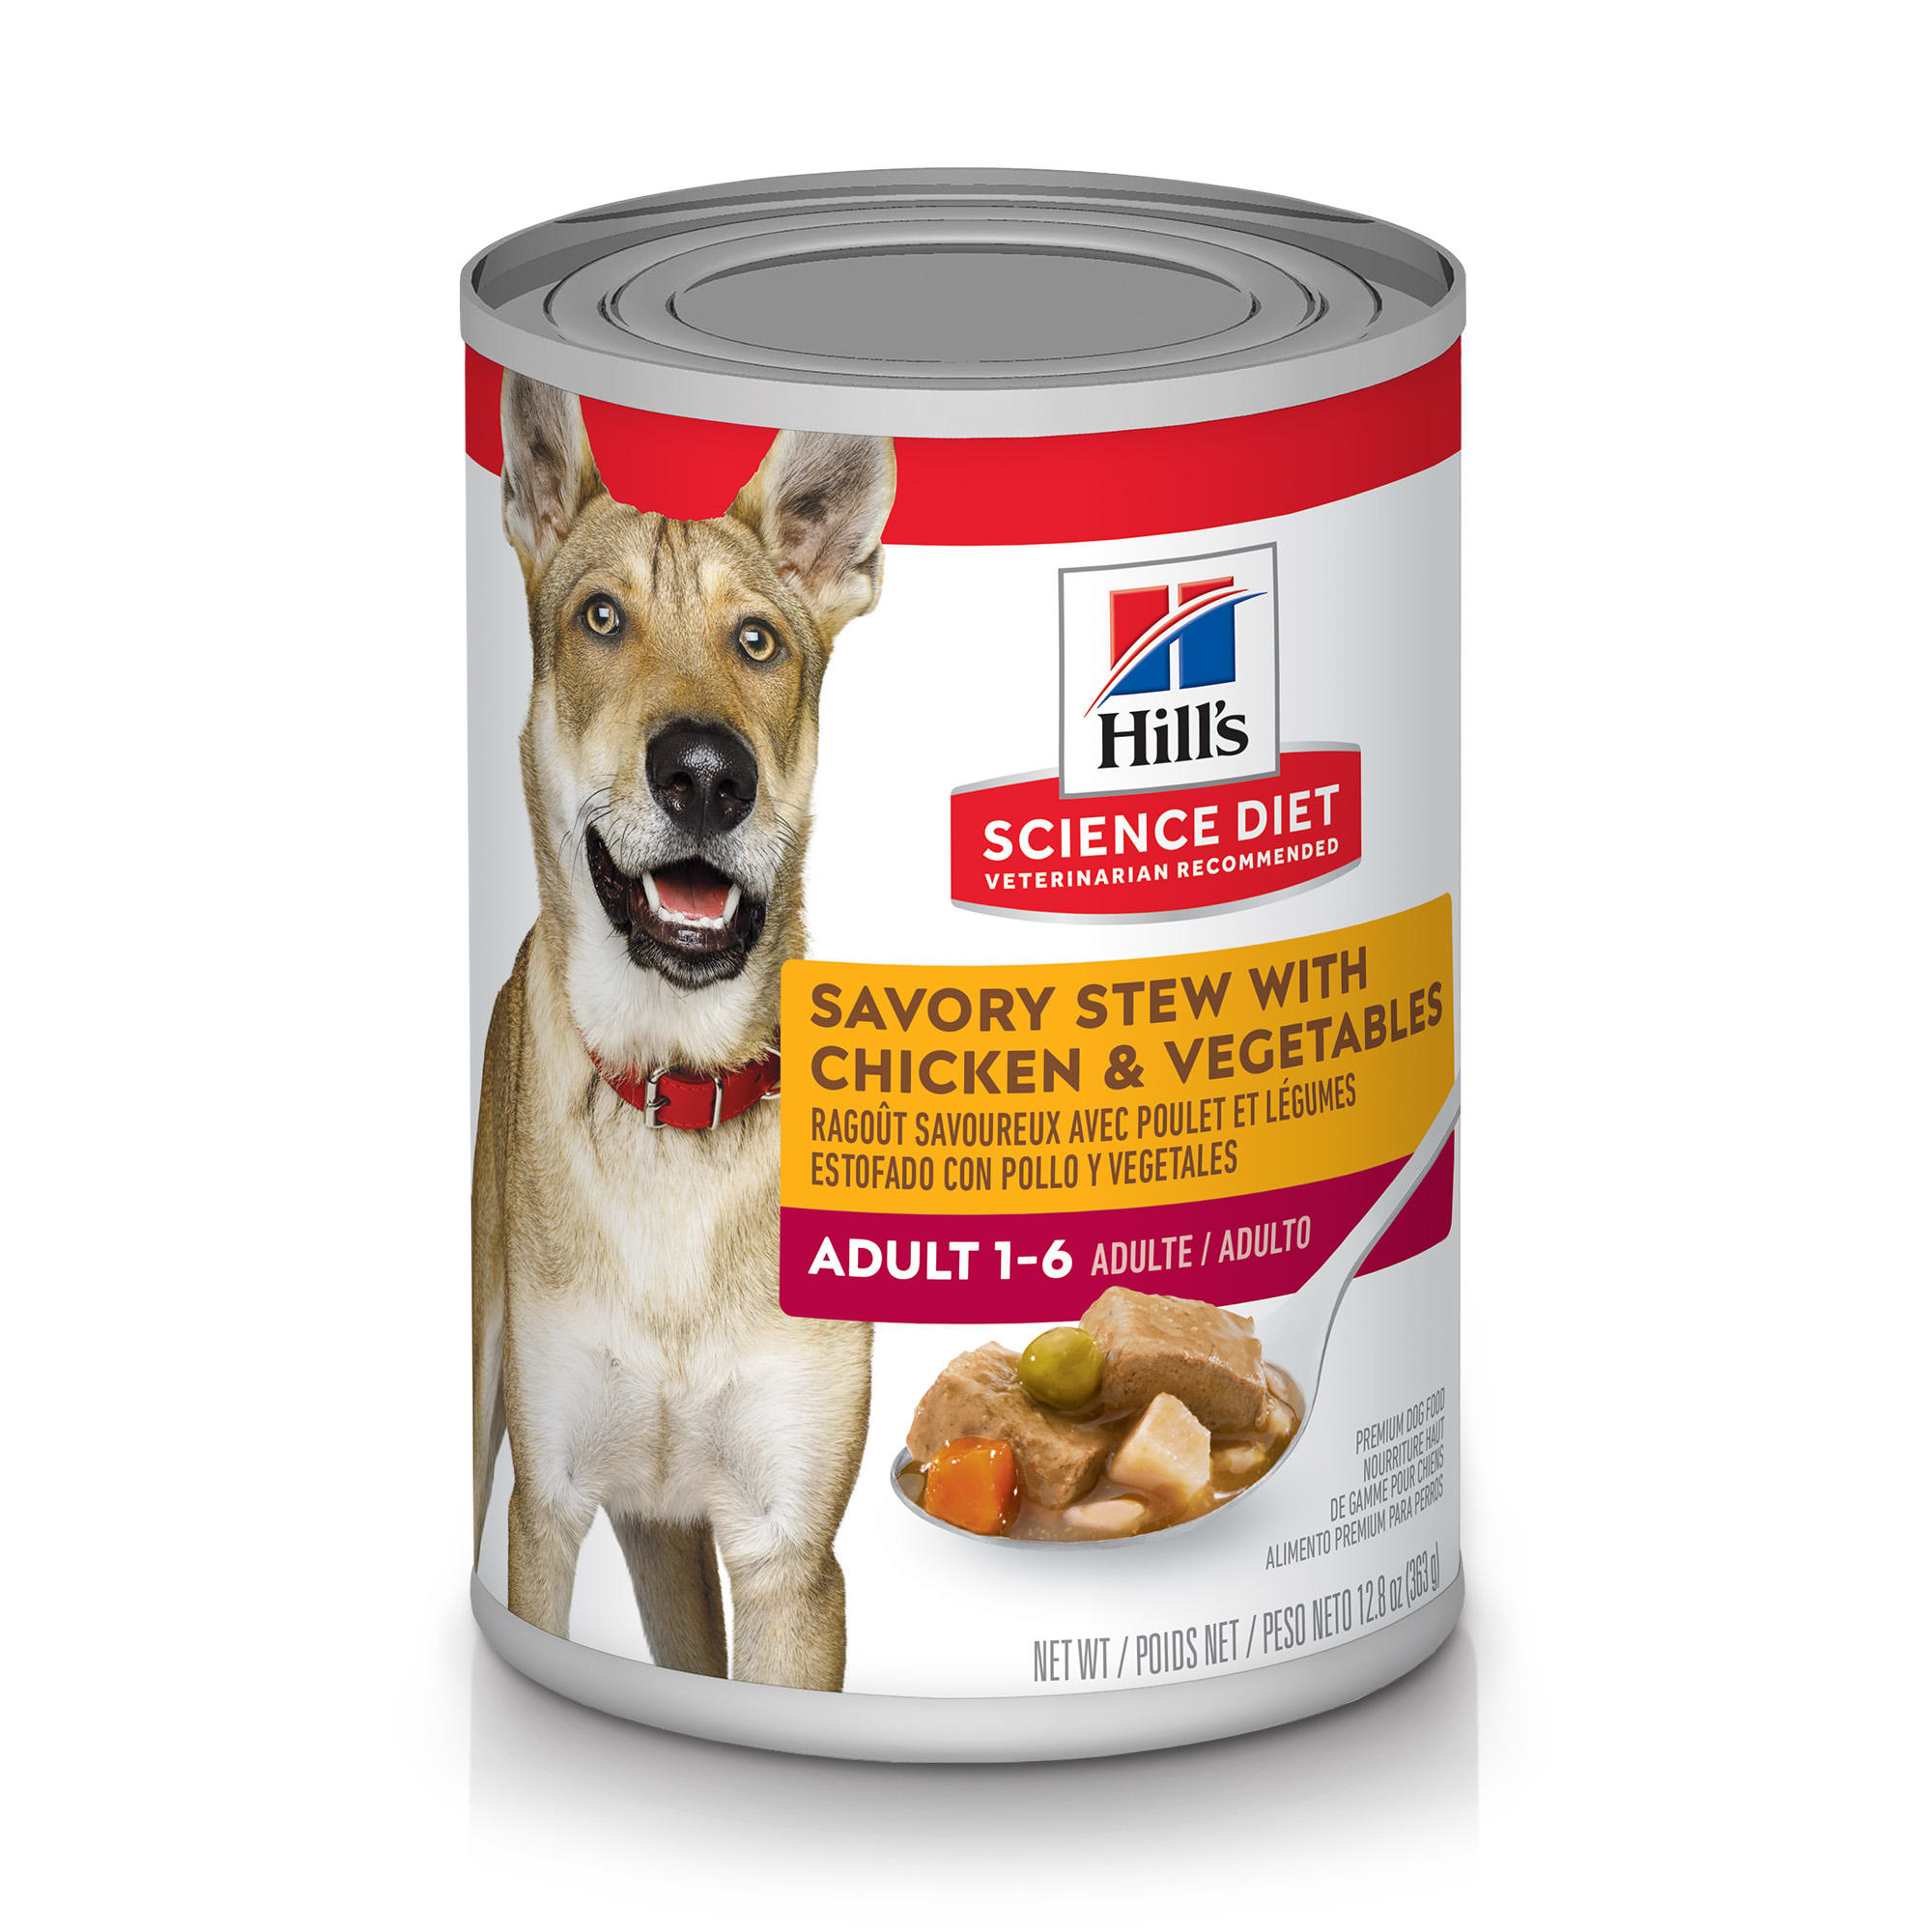 Photos - Dog Food Hills Hill's Hill's Science Diet Adult Savory Stew with Chicken & Vegetables Can 